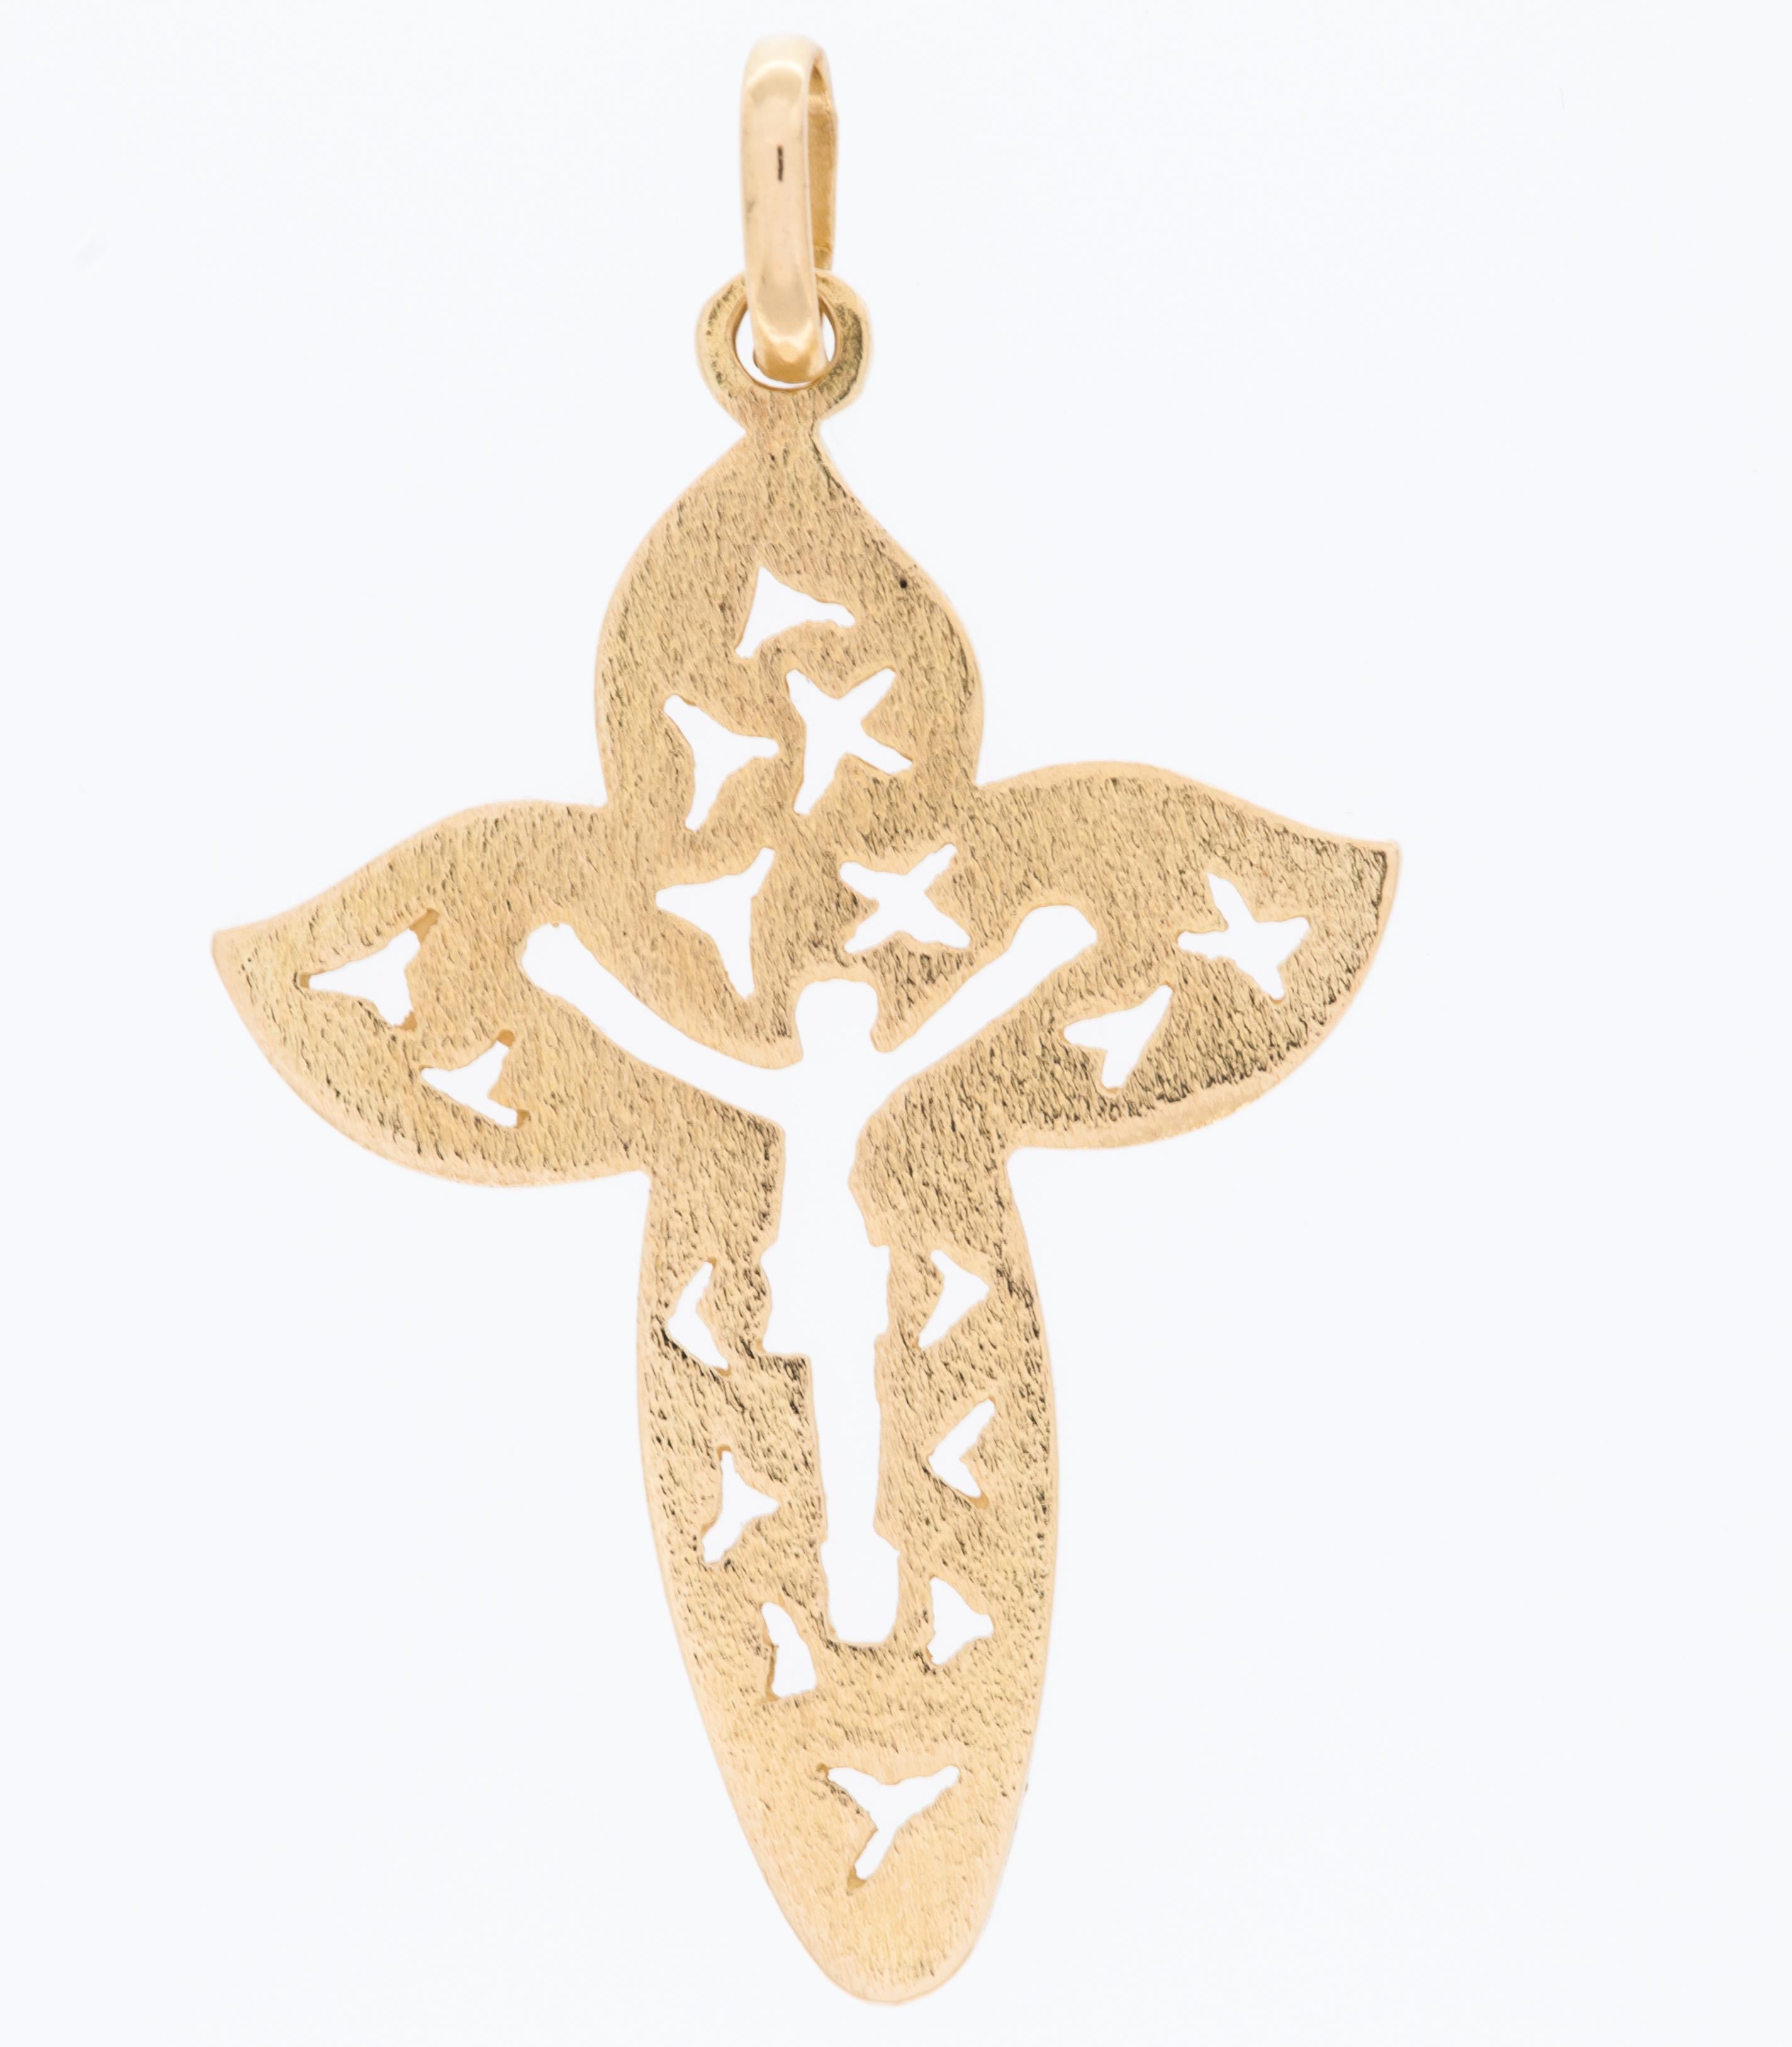 The Italian 18kt Yellow Gold Satin Cross is a beautifully crafted and symbolic piece of religious jewelry. This elegant cross pendant is made from high-quality 18-karat yellow gold, giving it a rich and luxurious appearance.

The surface of the